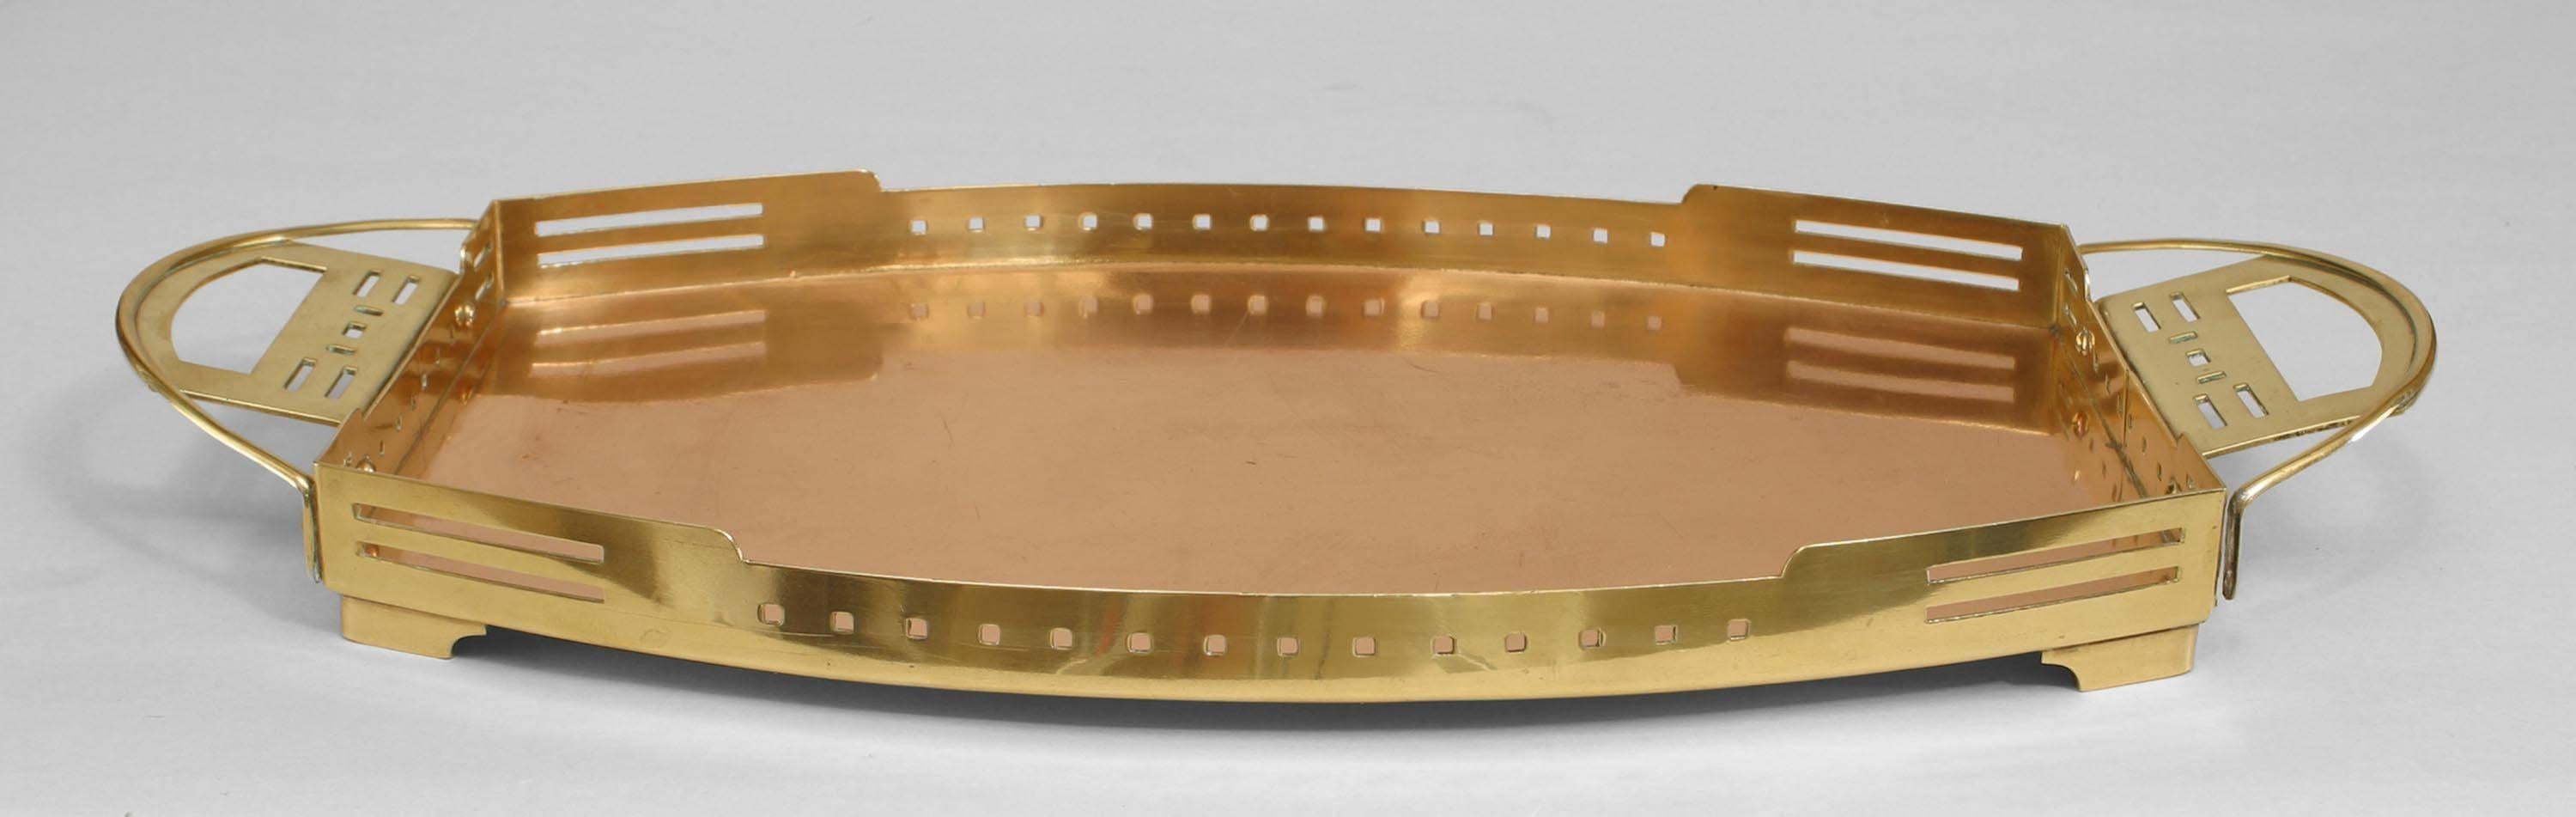 Belgian Secessionist (Early 20th Century) copper & brass serving tray with pierced sides & handles. (Attributed to SERRURIER-BOVY)
